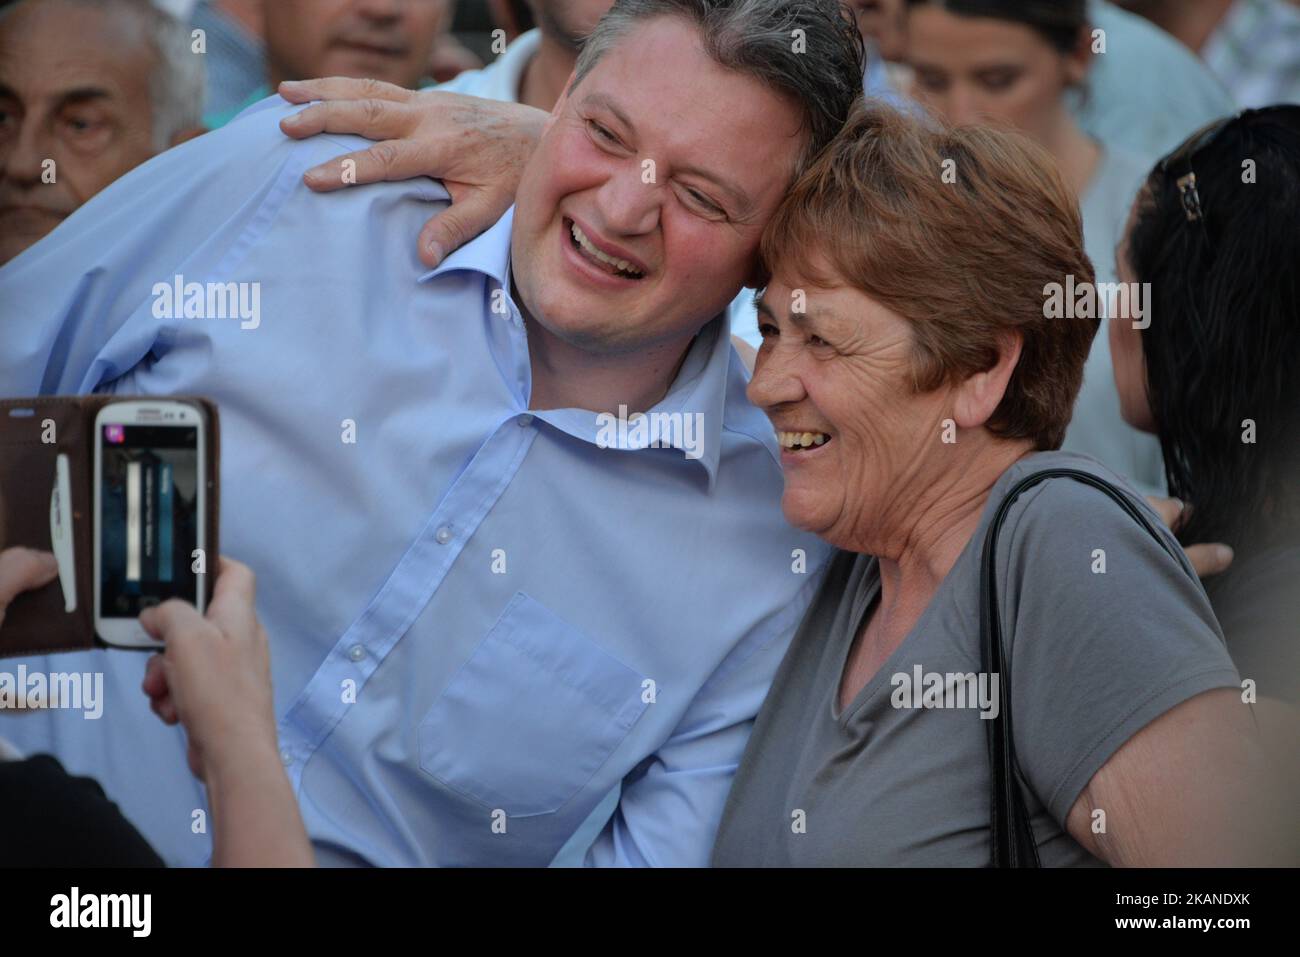 Minister Without Portfolio, Konrad Mizzi (left) poses for a photograph with a supporter before a campaign rally for the re-election of Labour Prime Minister Joseph Muscat in Paola, Malta on Wednesday, May 24, 2017. Mizzi lost his position as Energy and Health Minister after the Panama Papers leaks revealed Mizzi established an overseas shell company in Panama in 2014. (Photo by Kendall Gilbert/NurPhoto) *** Please Use Credit from Credit Field *** Stock Photo